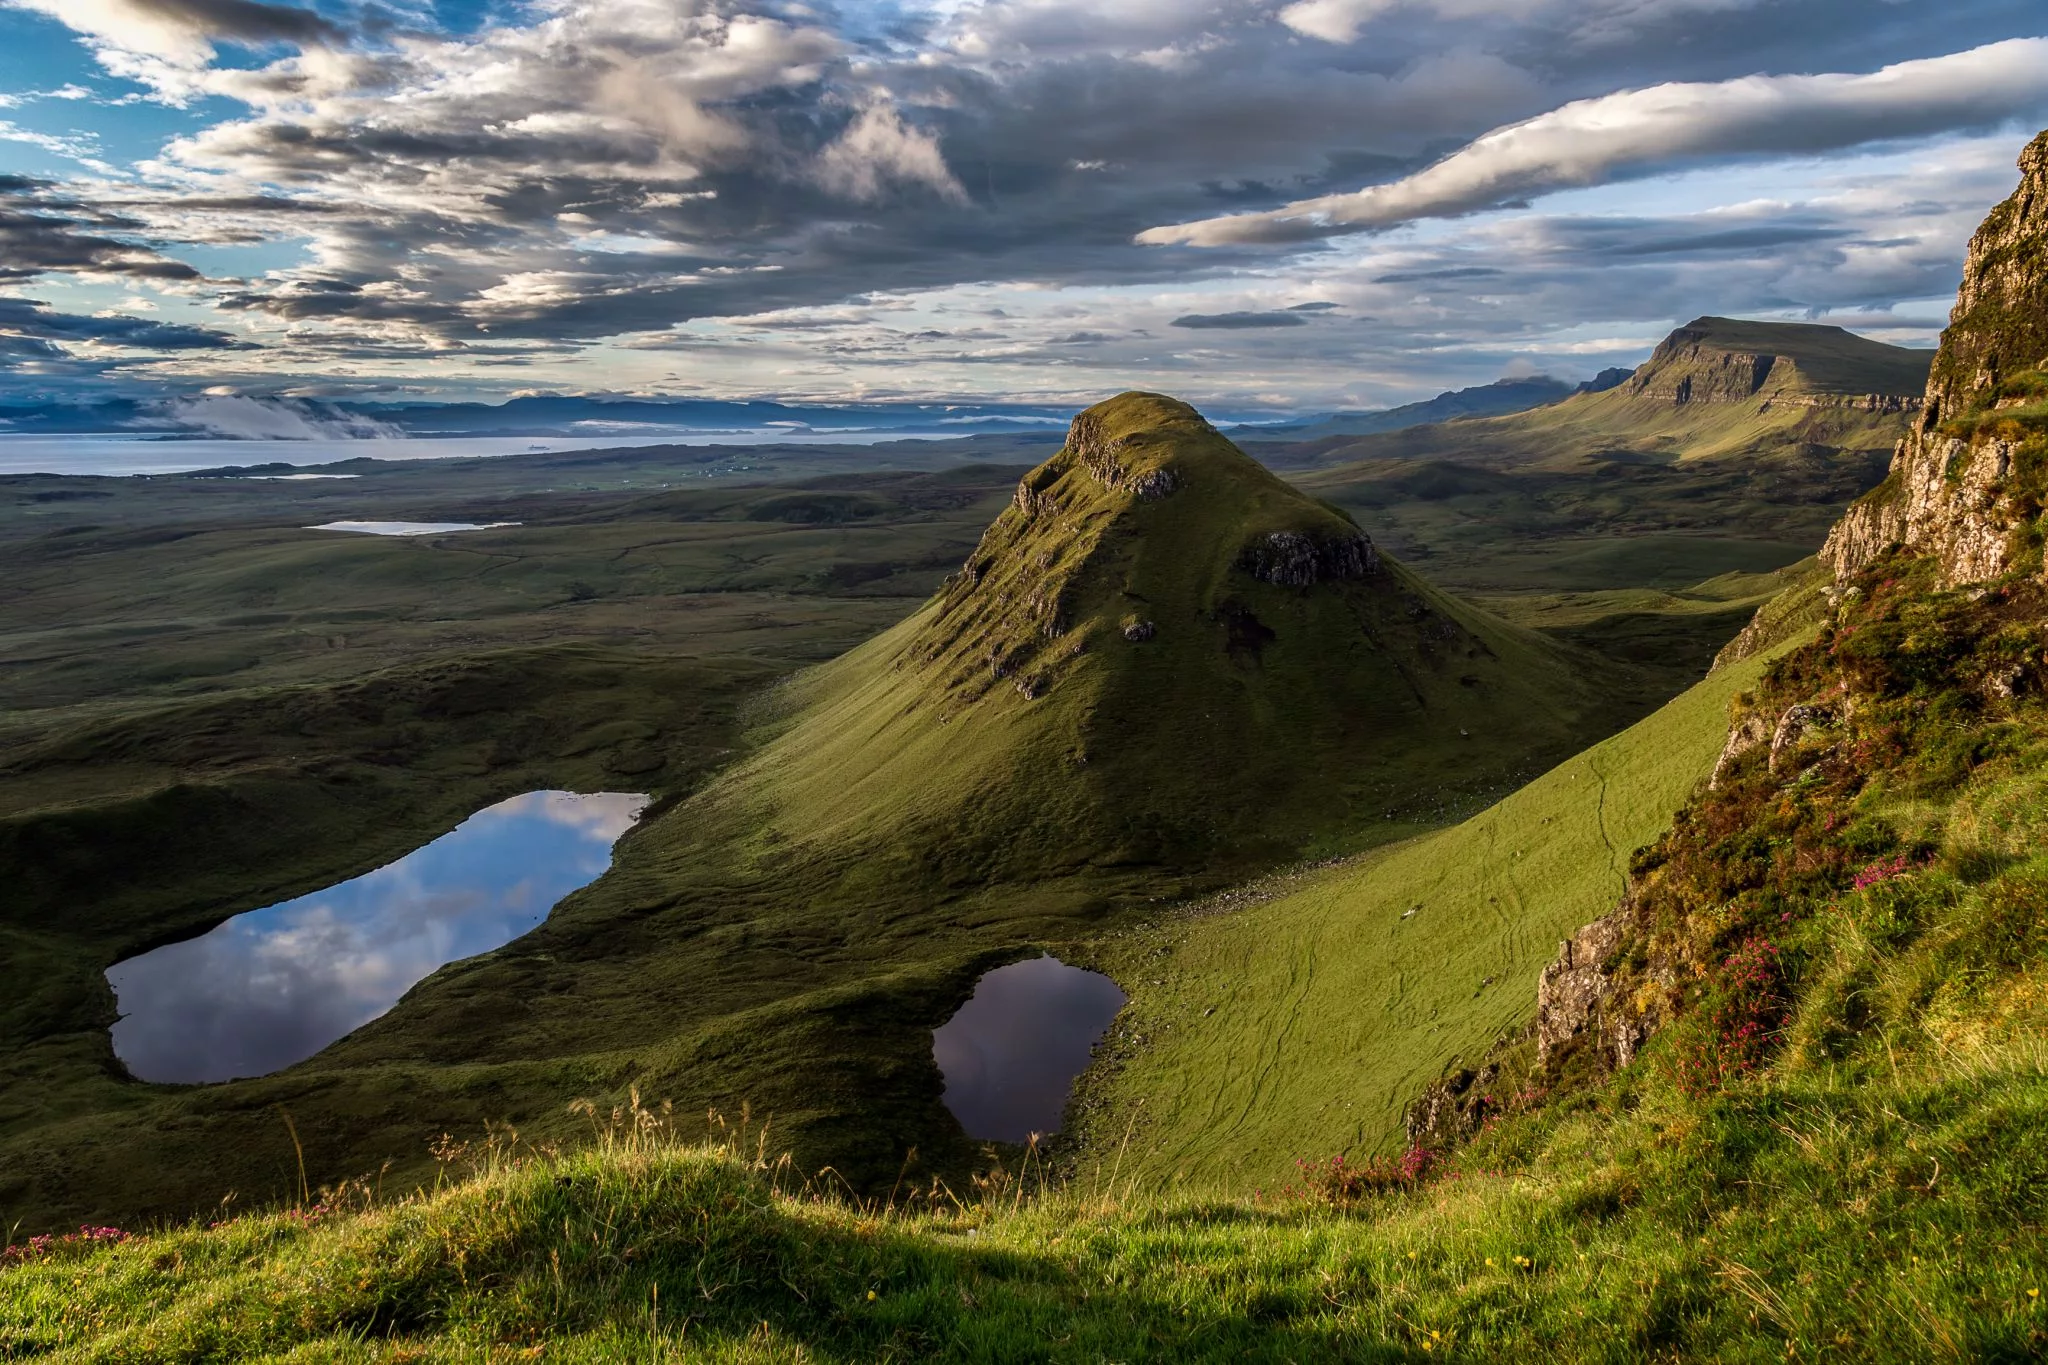 The South of Quiraing, United Kingdom